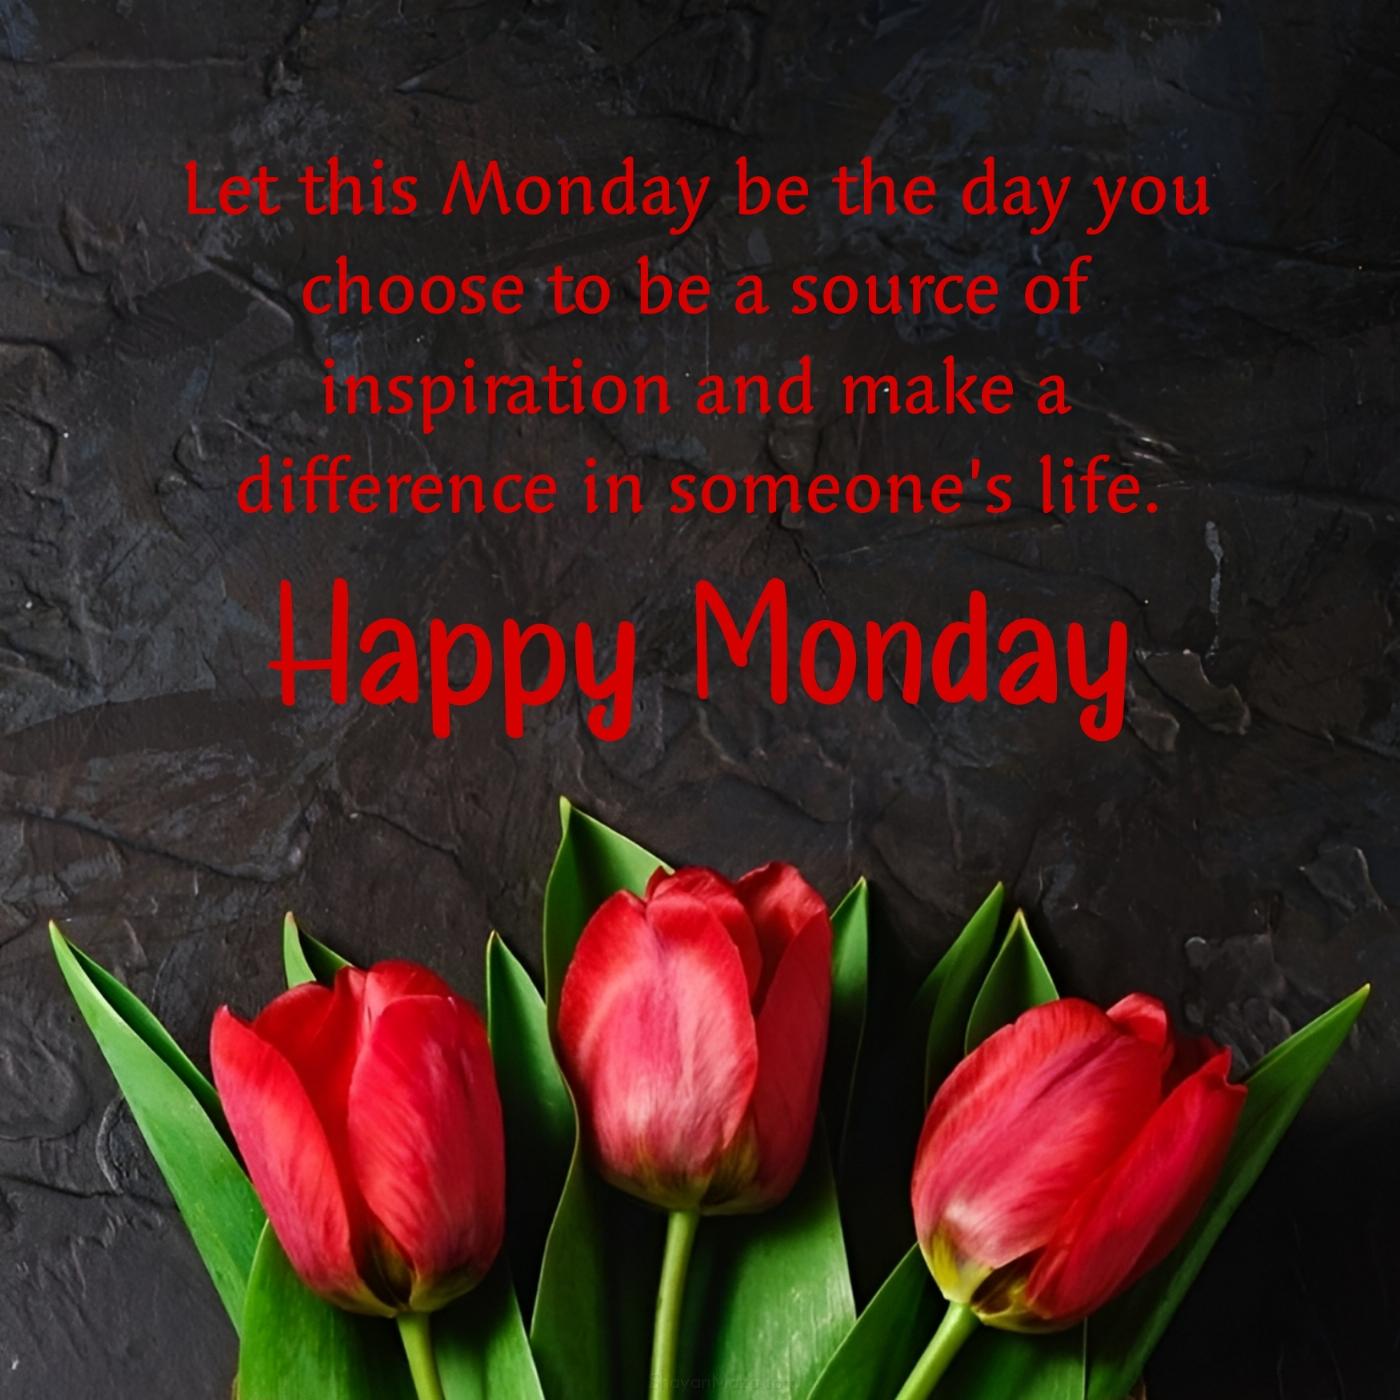 Let this Monday be the day you choose to be a source of inspiration